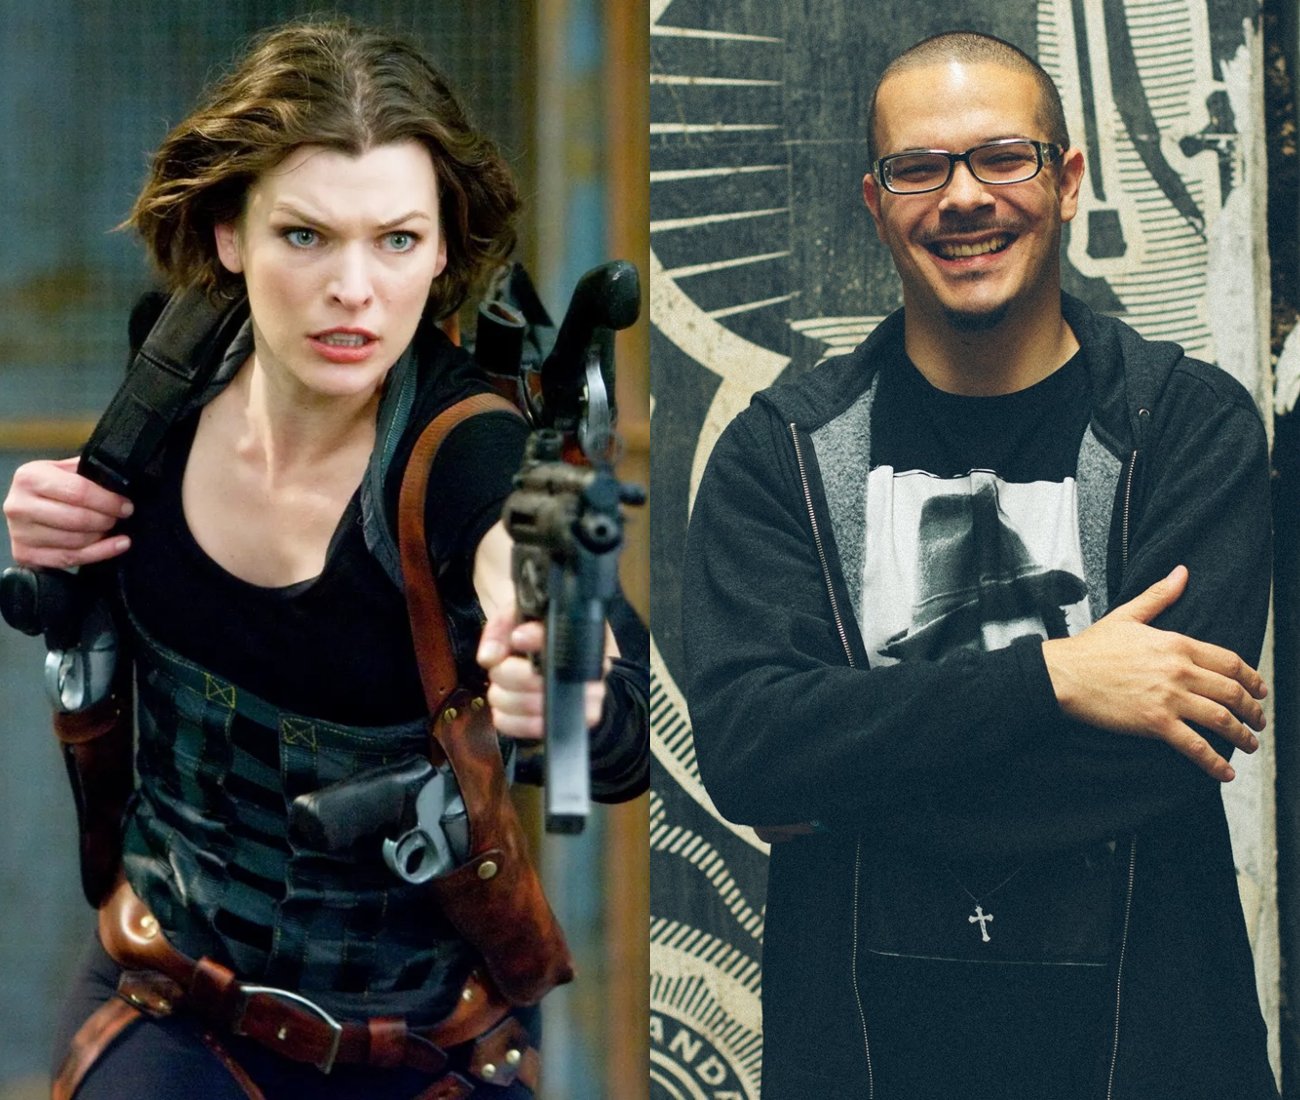 A collage picture of Milla Jovovich in 'Resident Evil' and Shaun King